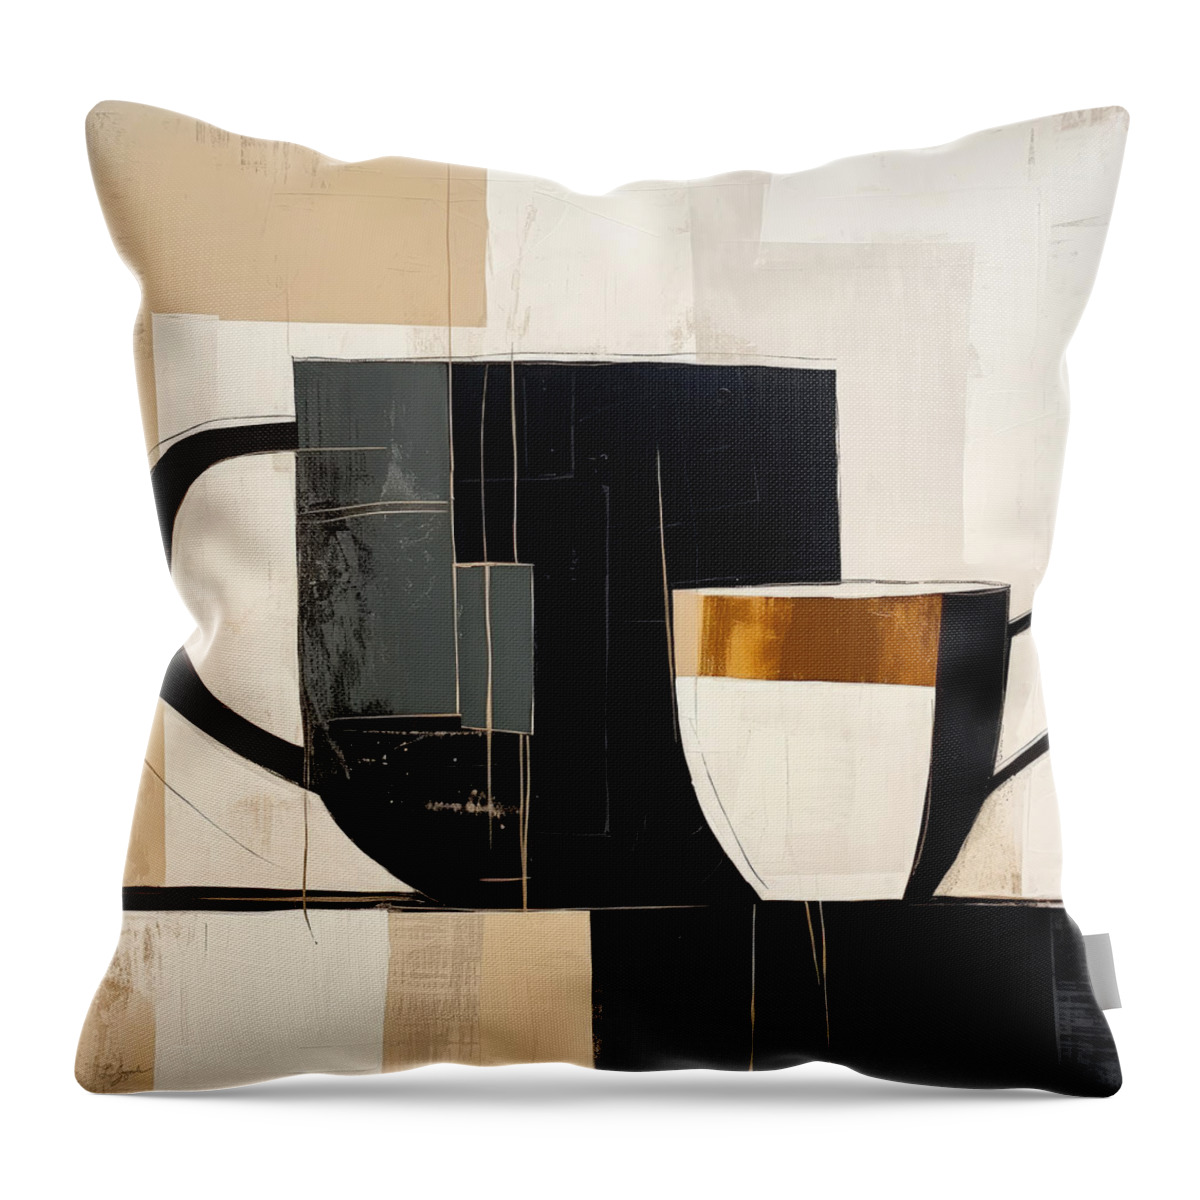  Throw Pillow featuring the painting Earthy Delights by Lourry Legarde